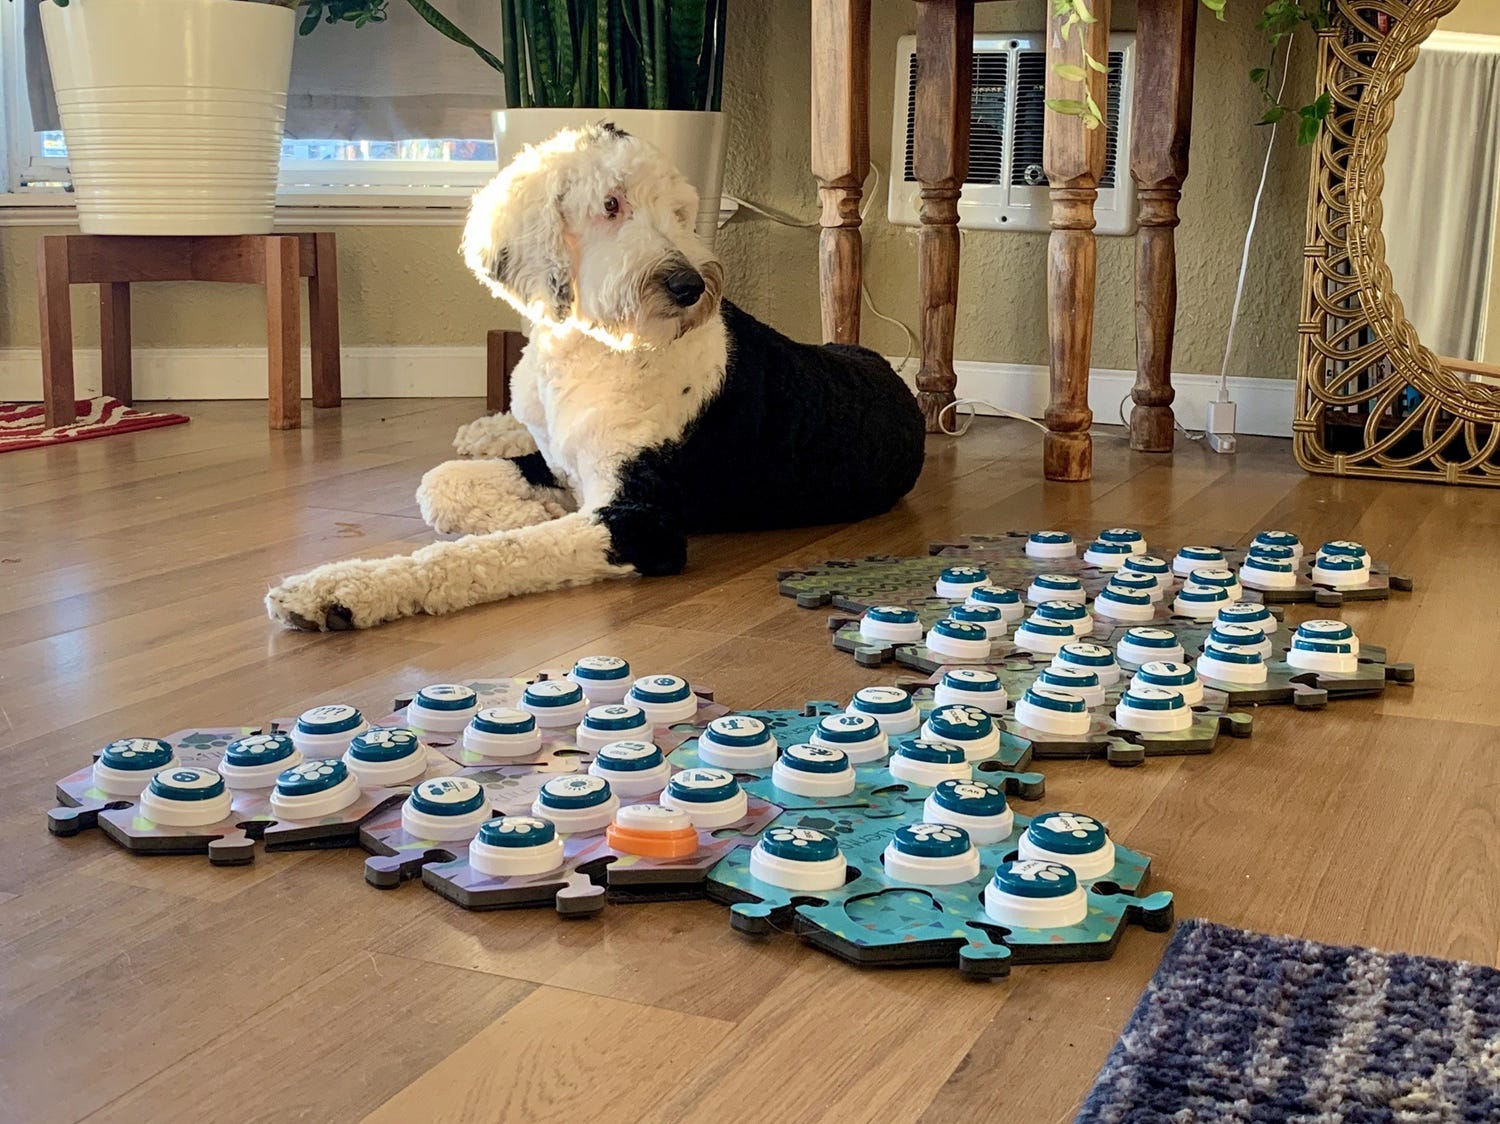 <p><strong><a href="https://fluent.pet/products/get-started" rel="nofollow noopener sponsored">Get Started Kit, available at Fluent Pet, $79.95</a></strong></p><p>They'll never wonder again what's on their dog's mind with these talking <a href="https://www.businessinsider.com/best-dog-buttons" rel="noopener">dog buttons</a>. This kit popularized by TikTok phenom Bunny comes with six recordable buttons, three easy-to-assemble tiles and 67 ideogram ID stickers. They can start with easy everyday concepts like "potty," "outside," and "play" and it'll be no time before they're having full-fledged conversations with their dog.</p>